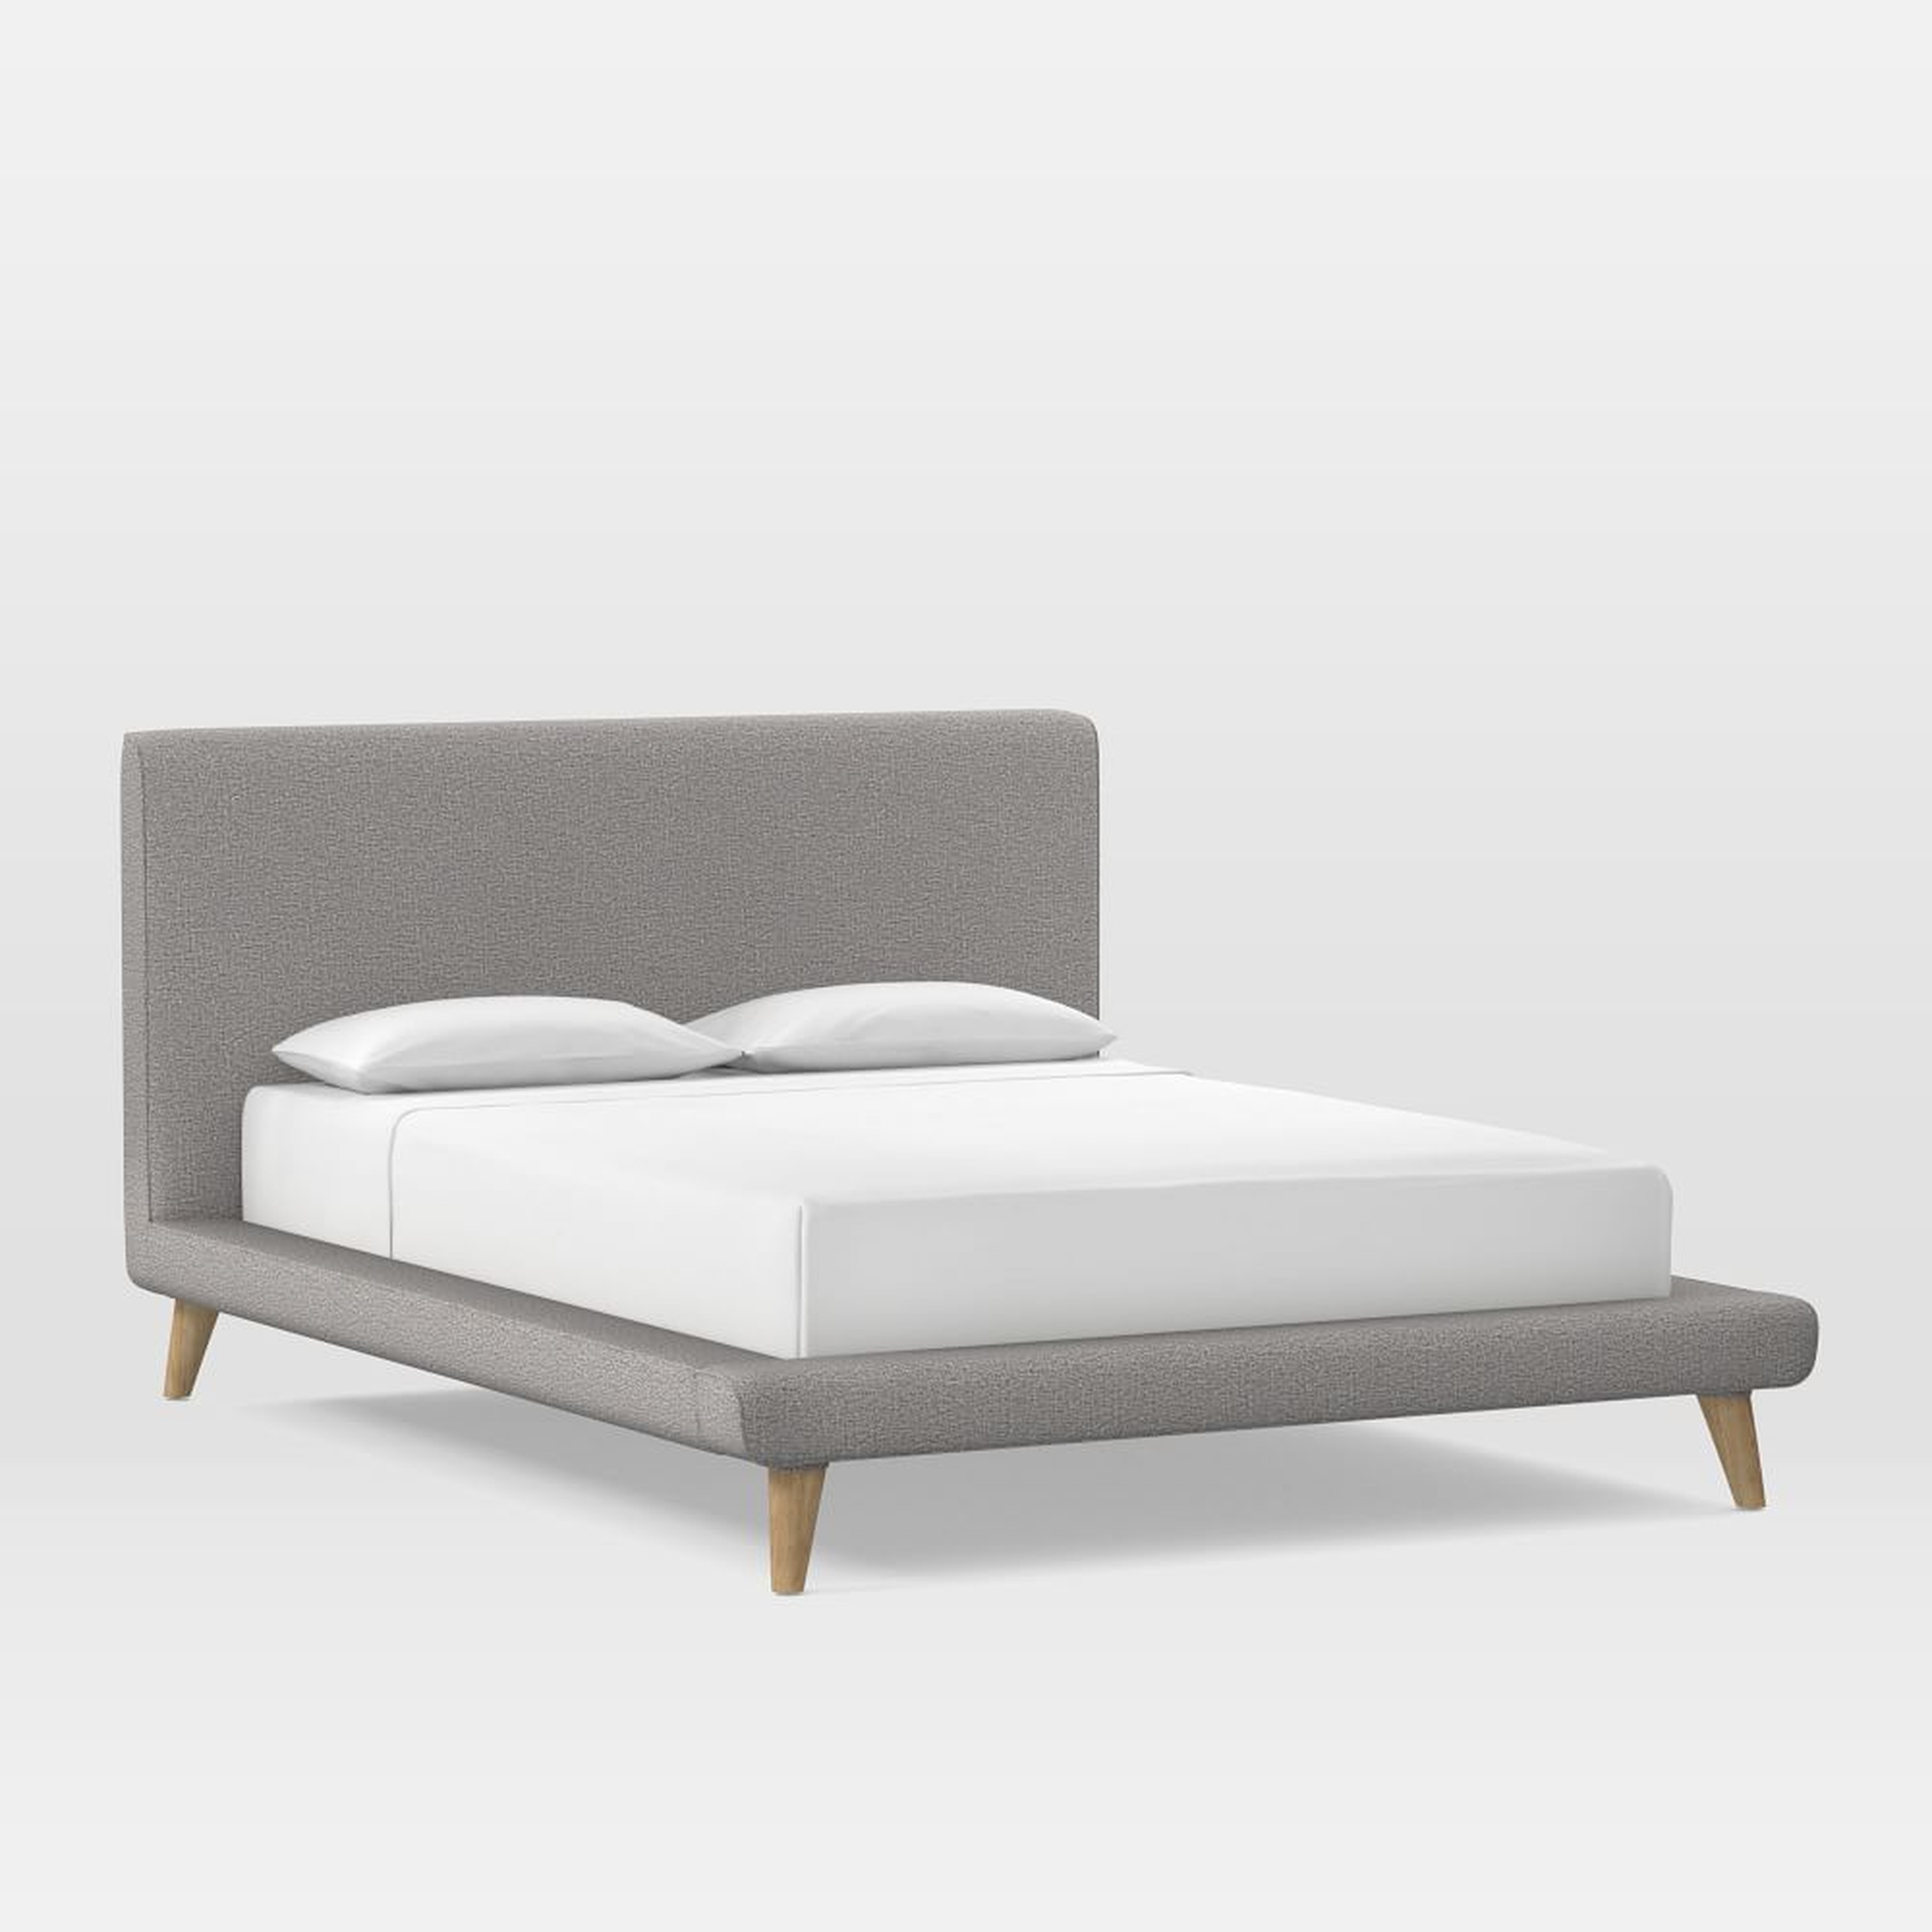 Mod Upholstered Bed, Queen, Deco Weave, Pearl Gray - West Elm